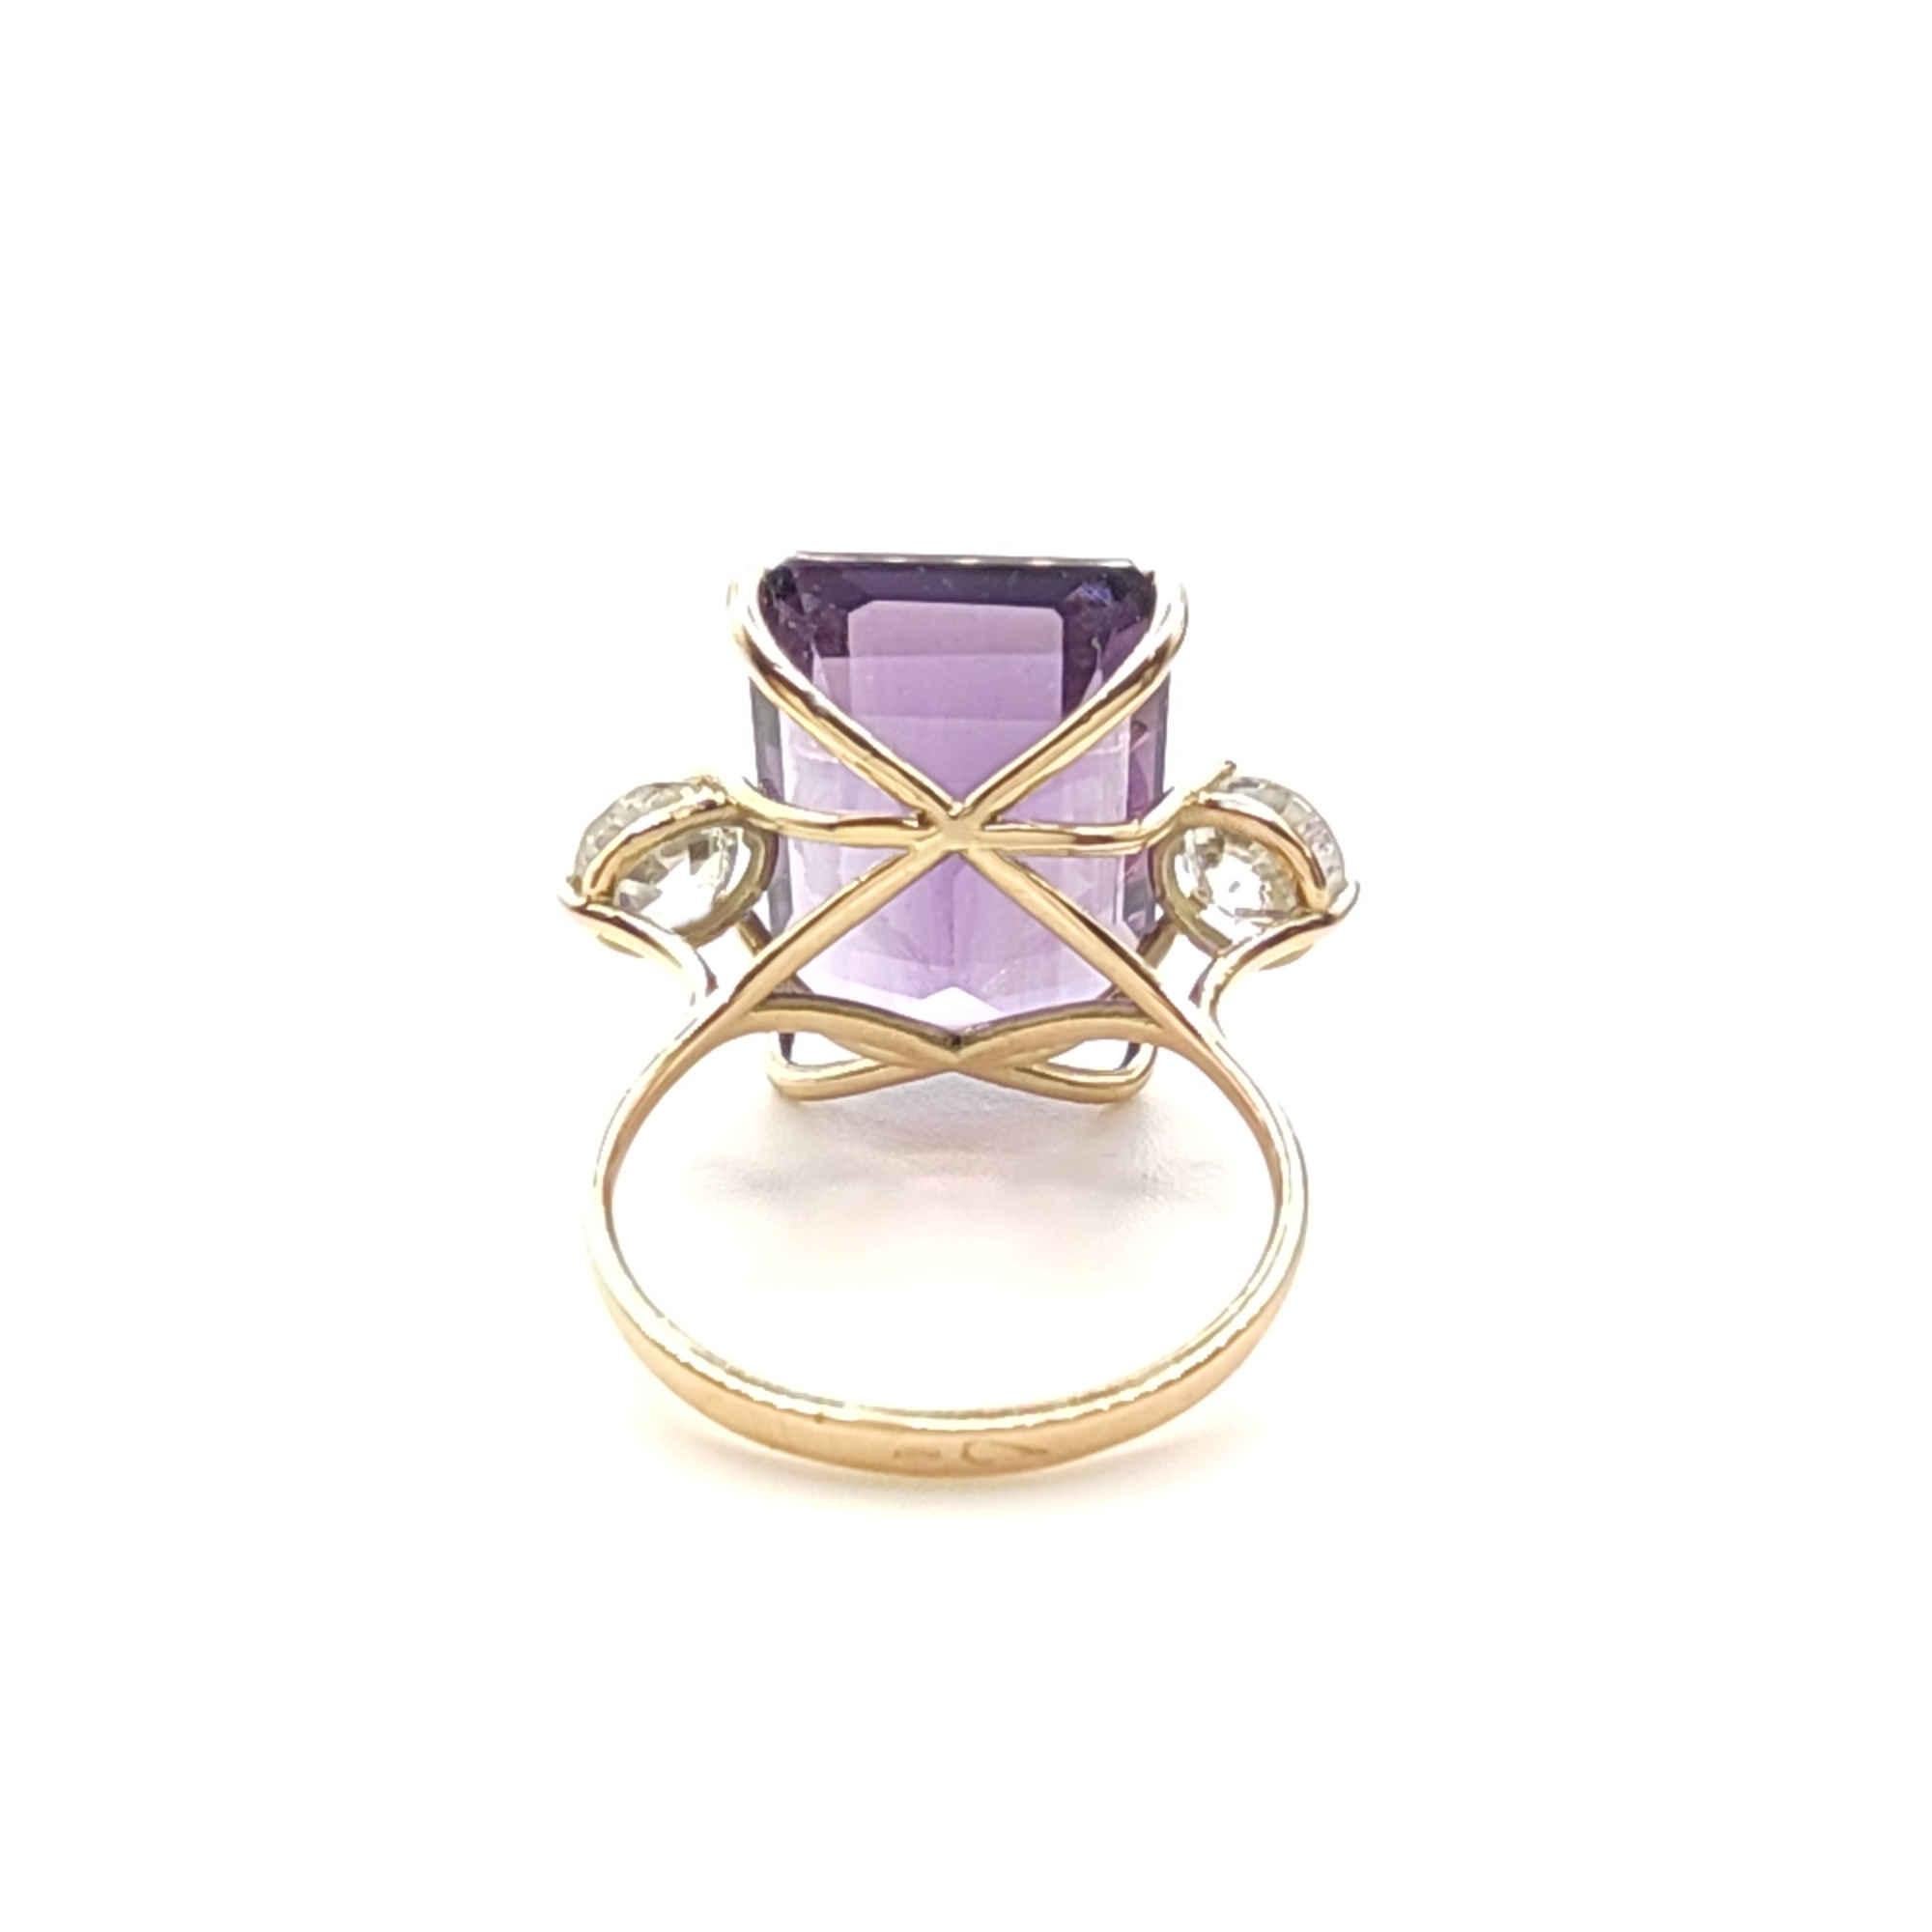 IGE Certified 17.28 Carat Amethyst Diamond Cocktail Ring For Sale 2